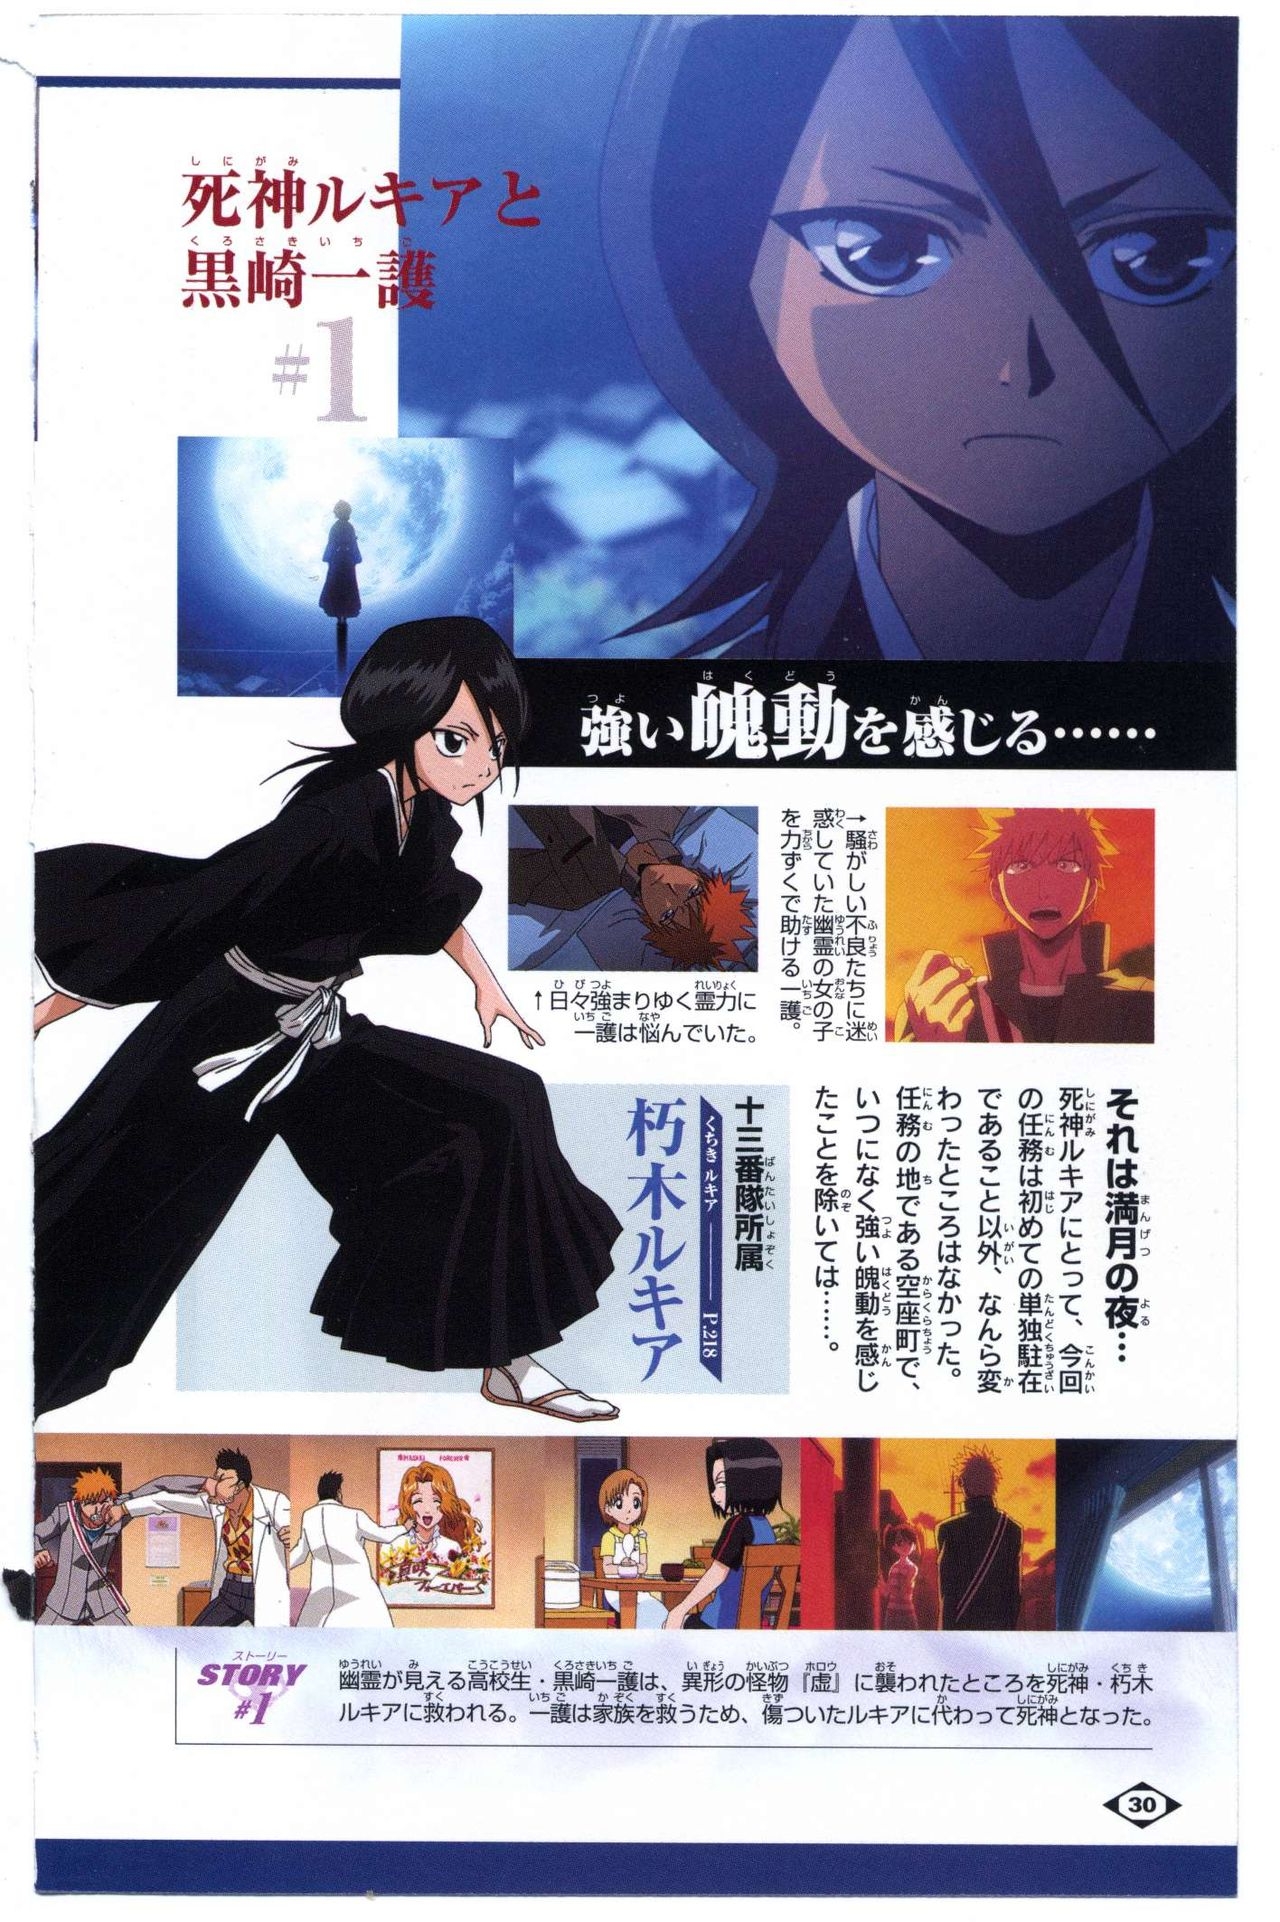 Bleach: Official Animation Book VIBEs 30